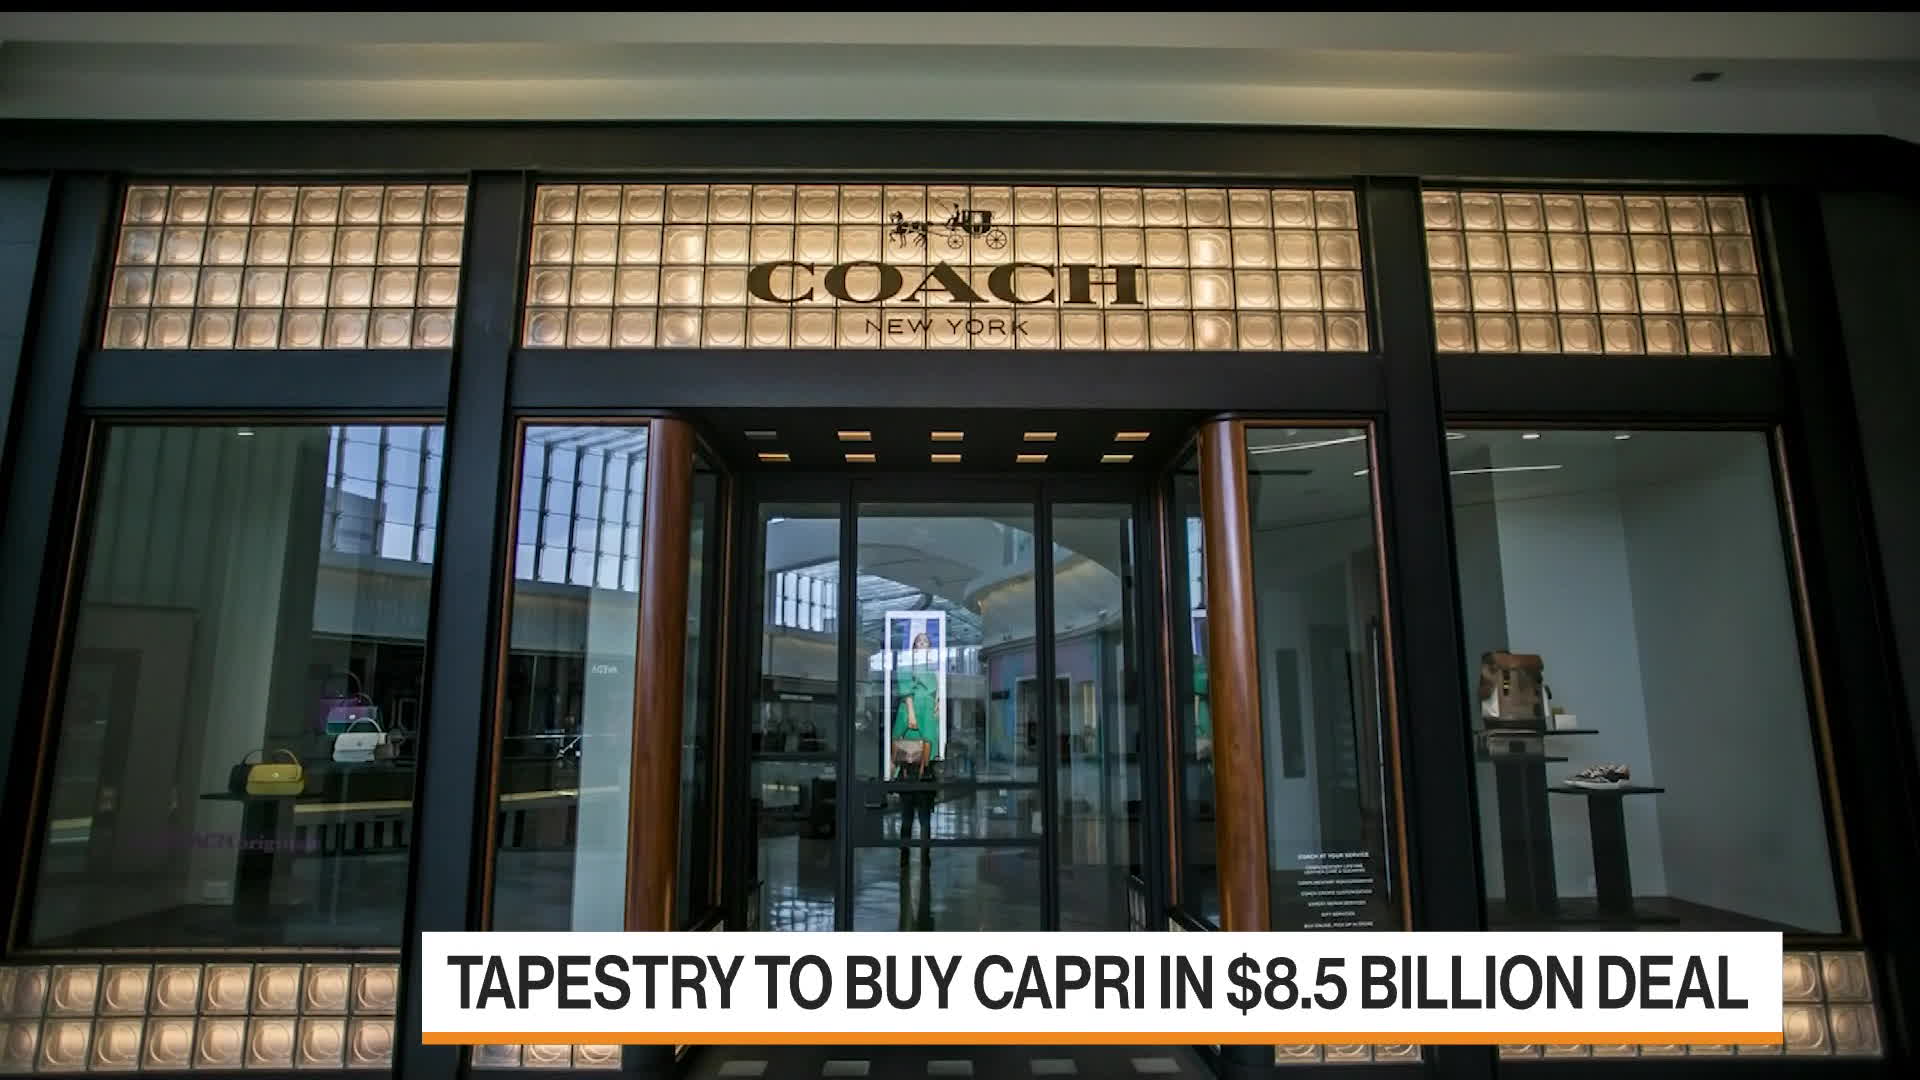 Tapestry and Capri are combining in an $8.5 billion deal